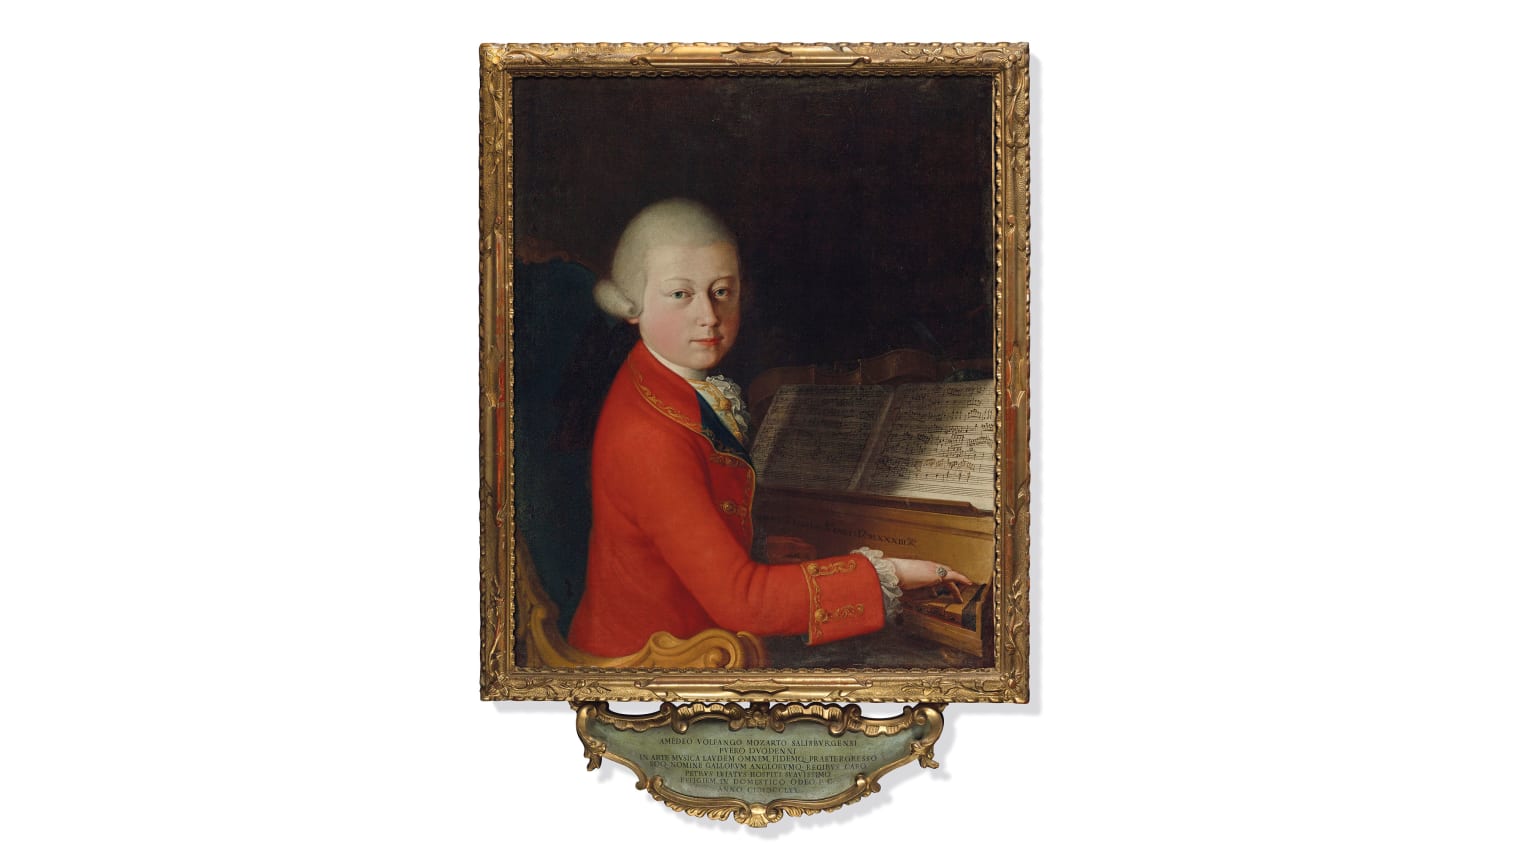 The portrait of a teenage Wolfgang Amadeus Mozart is expected to fetch between $882,000 and $1.3 million at auction on November 27.